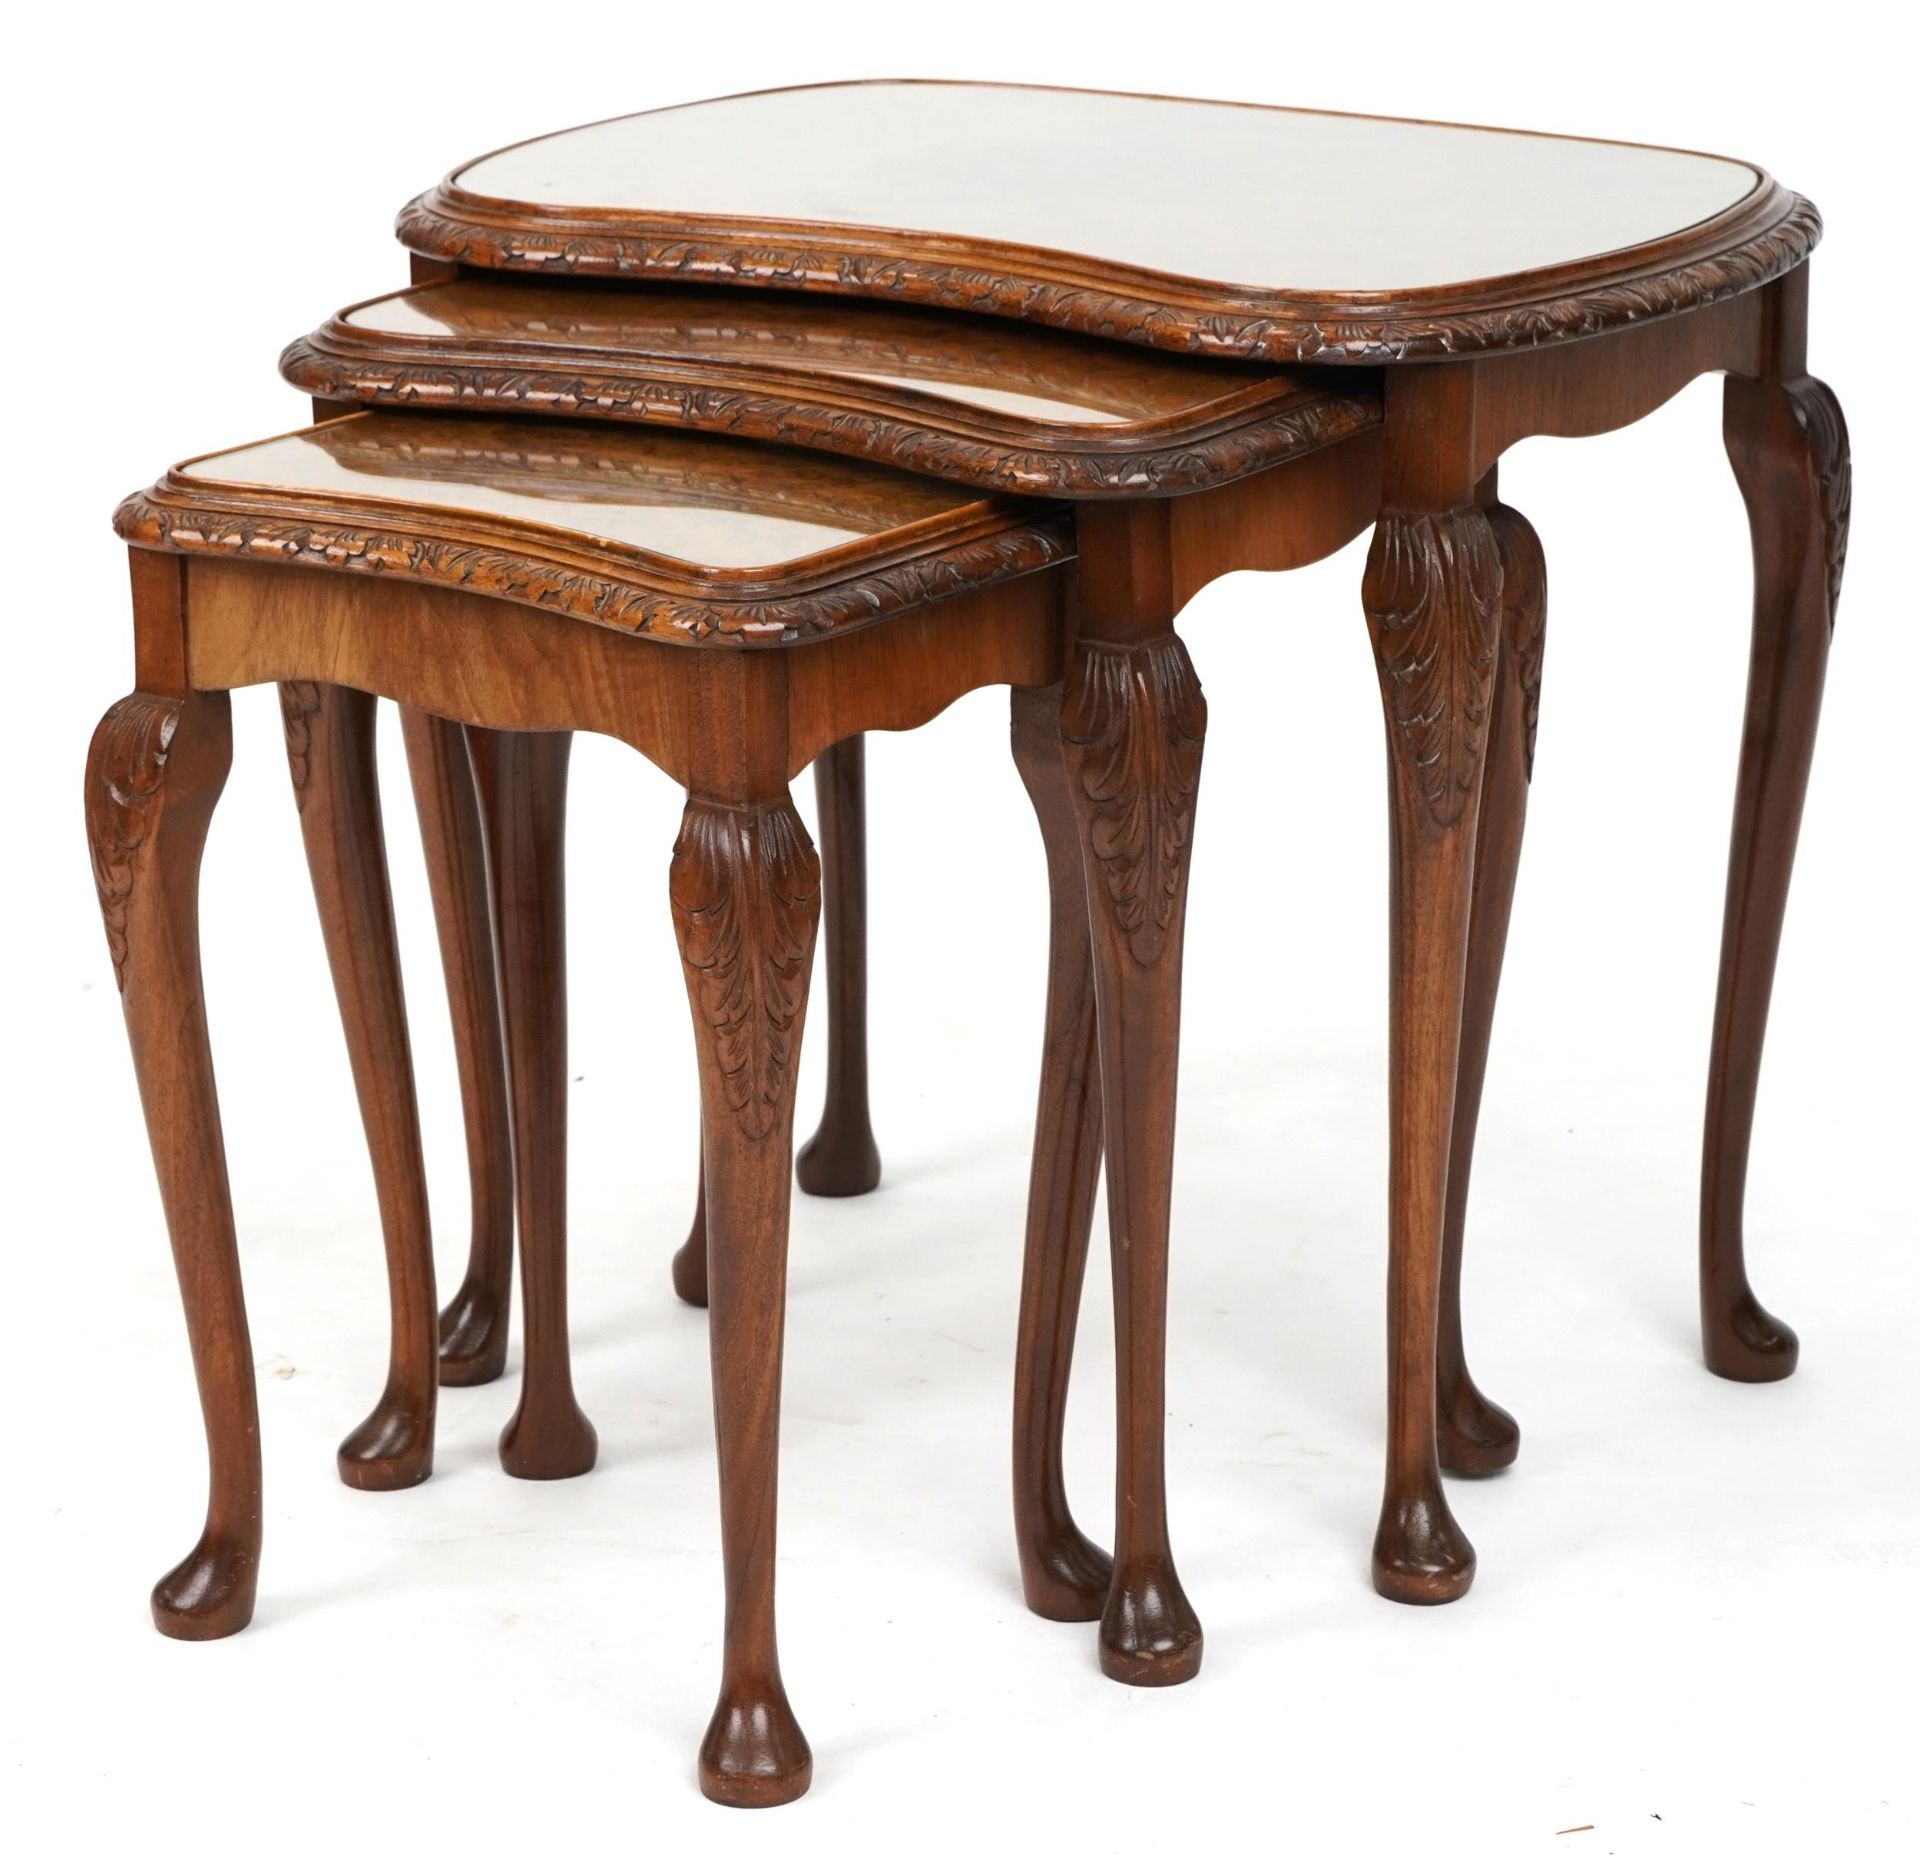 Nest of three burr walnut kidney shaped occasional tables with glass tops, the largest 57cm H x 60cm